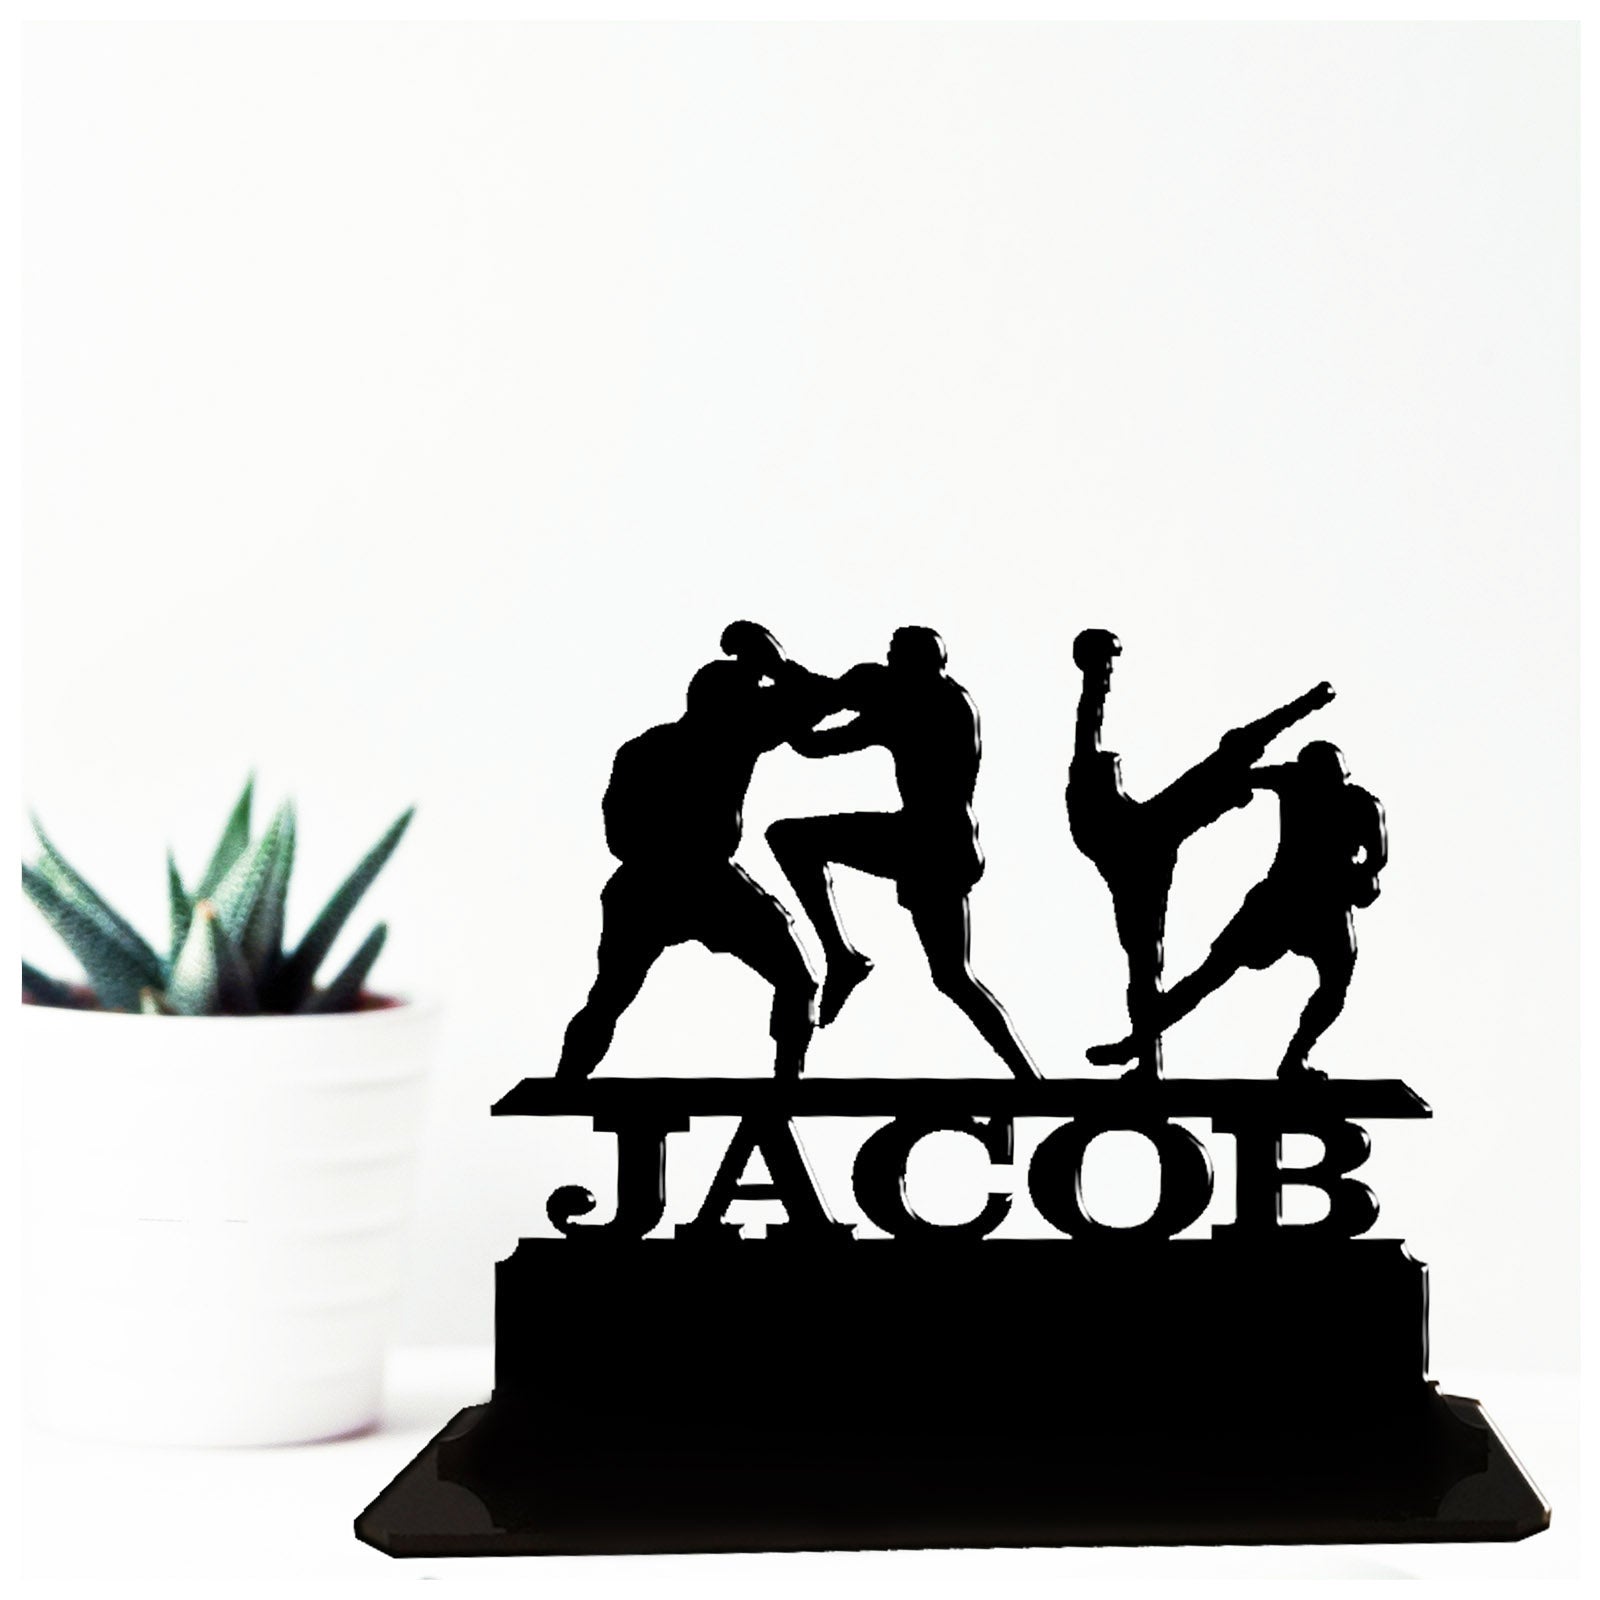 Acrylic unique personalised thai boxing gifts for amateur and professional boxers. Standalone ornament.